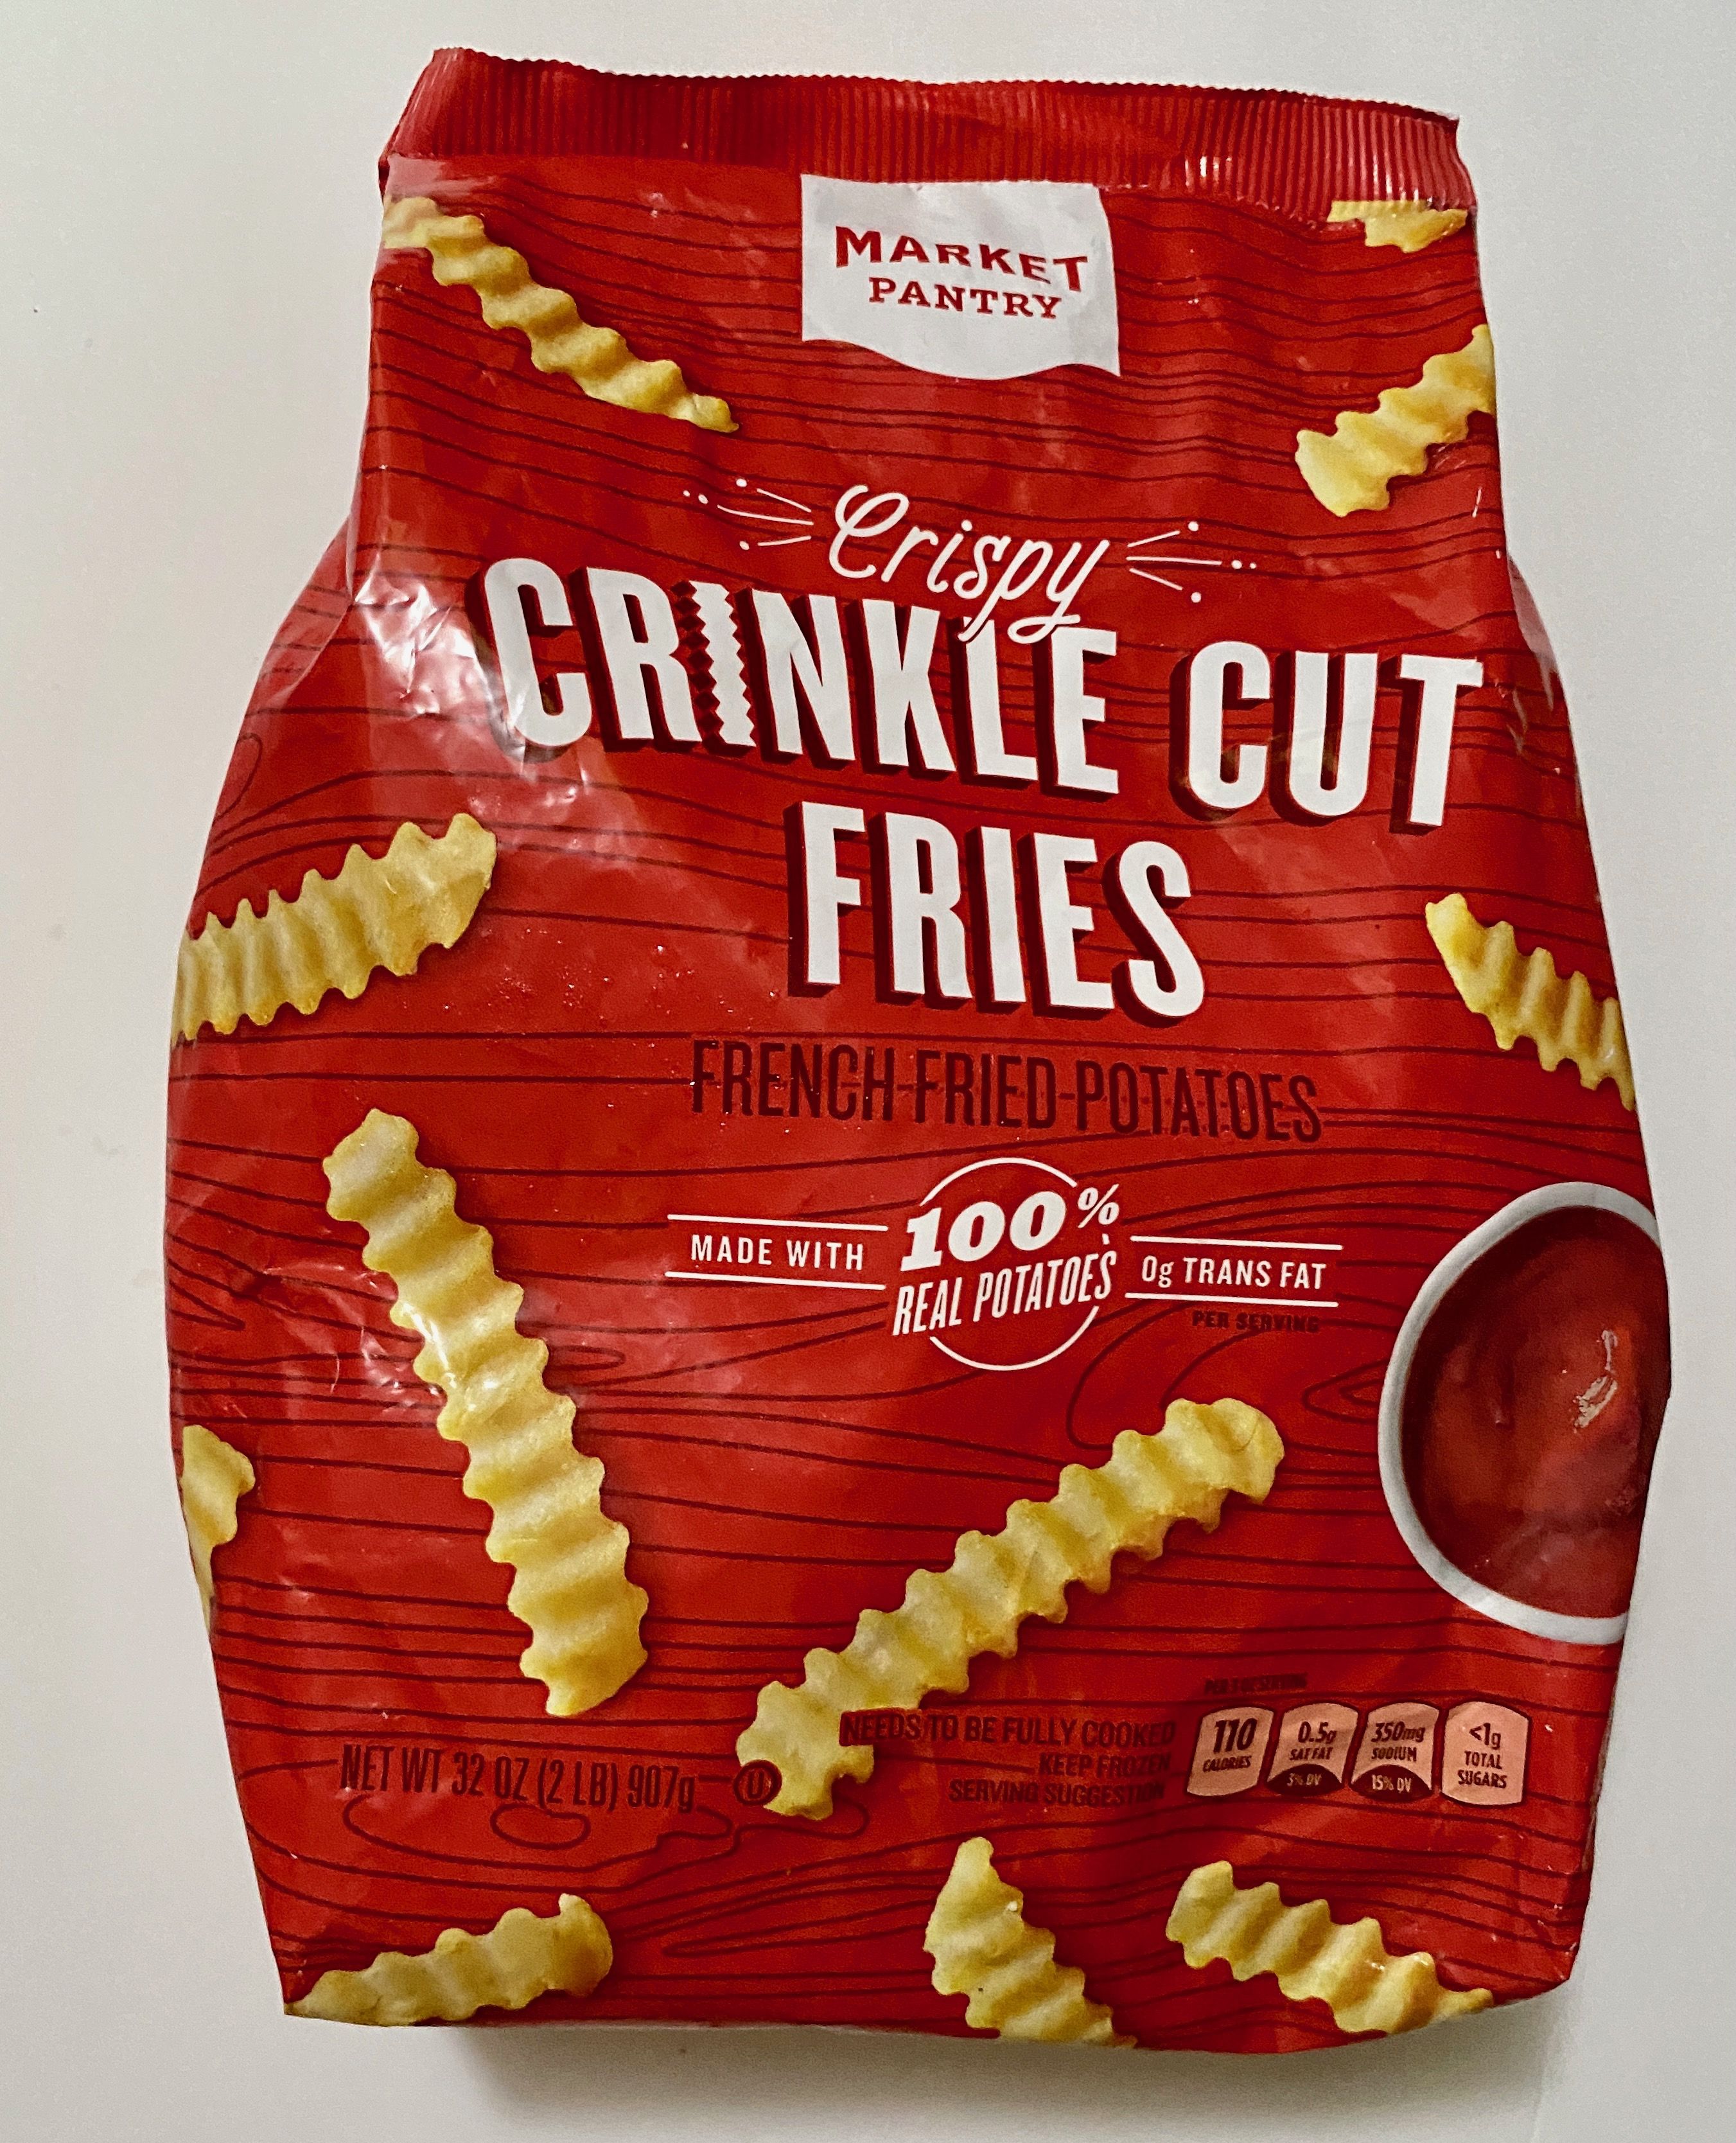 I Tested 5 Different Frozen French Fries and This Is the Brand I'll Buy  From Now On